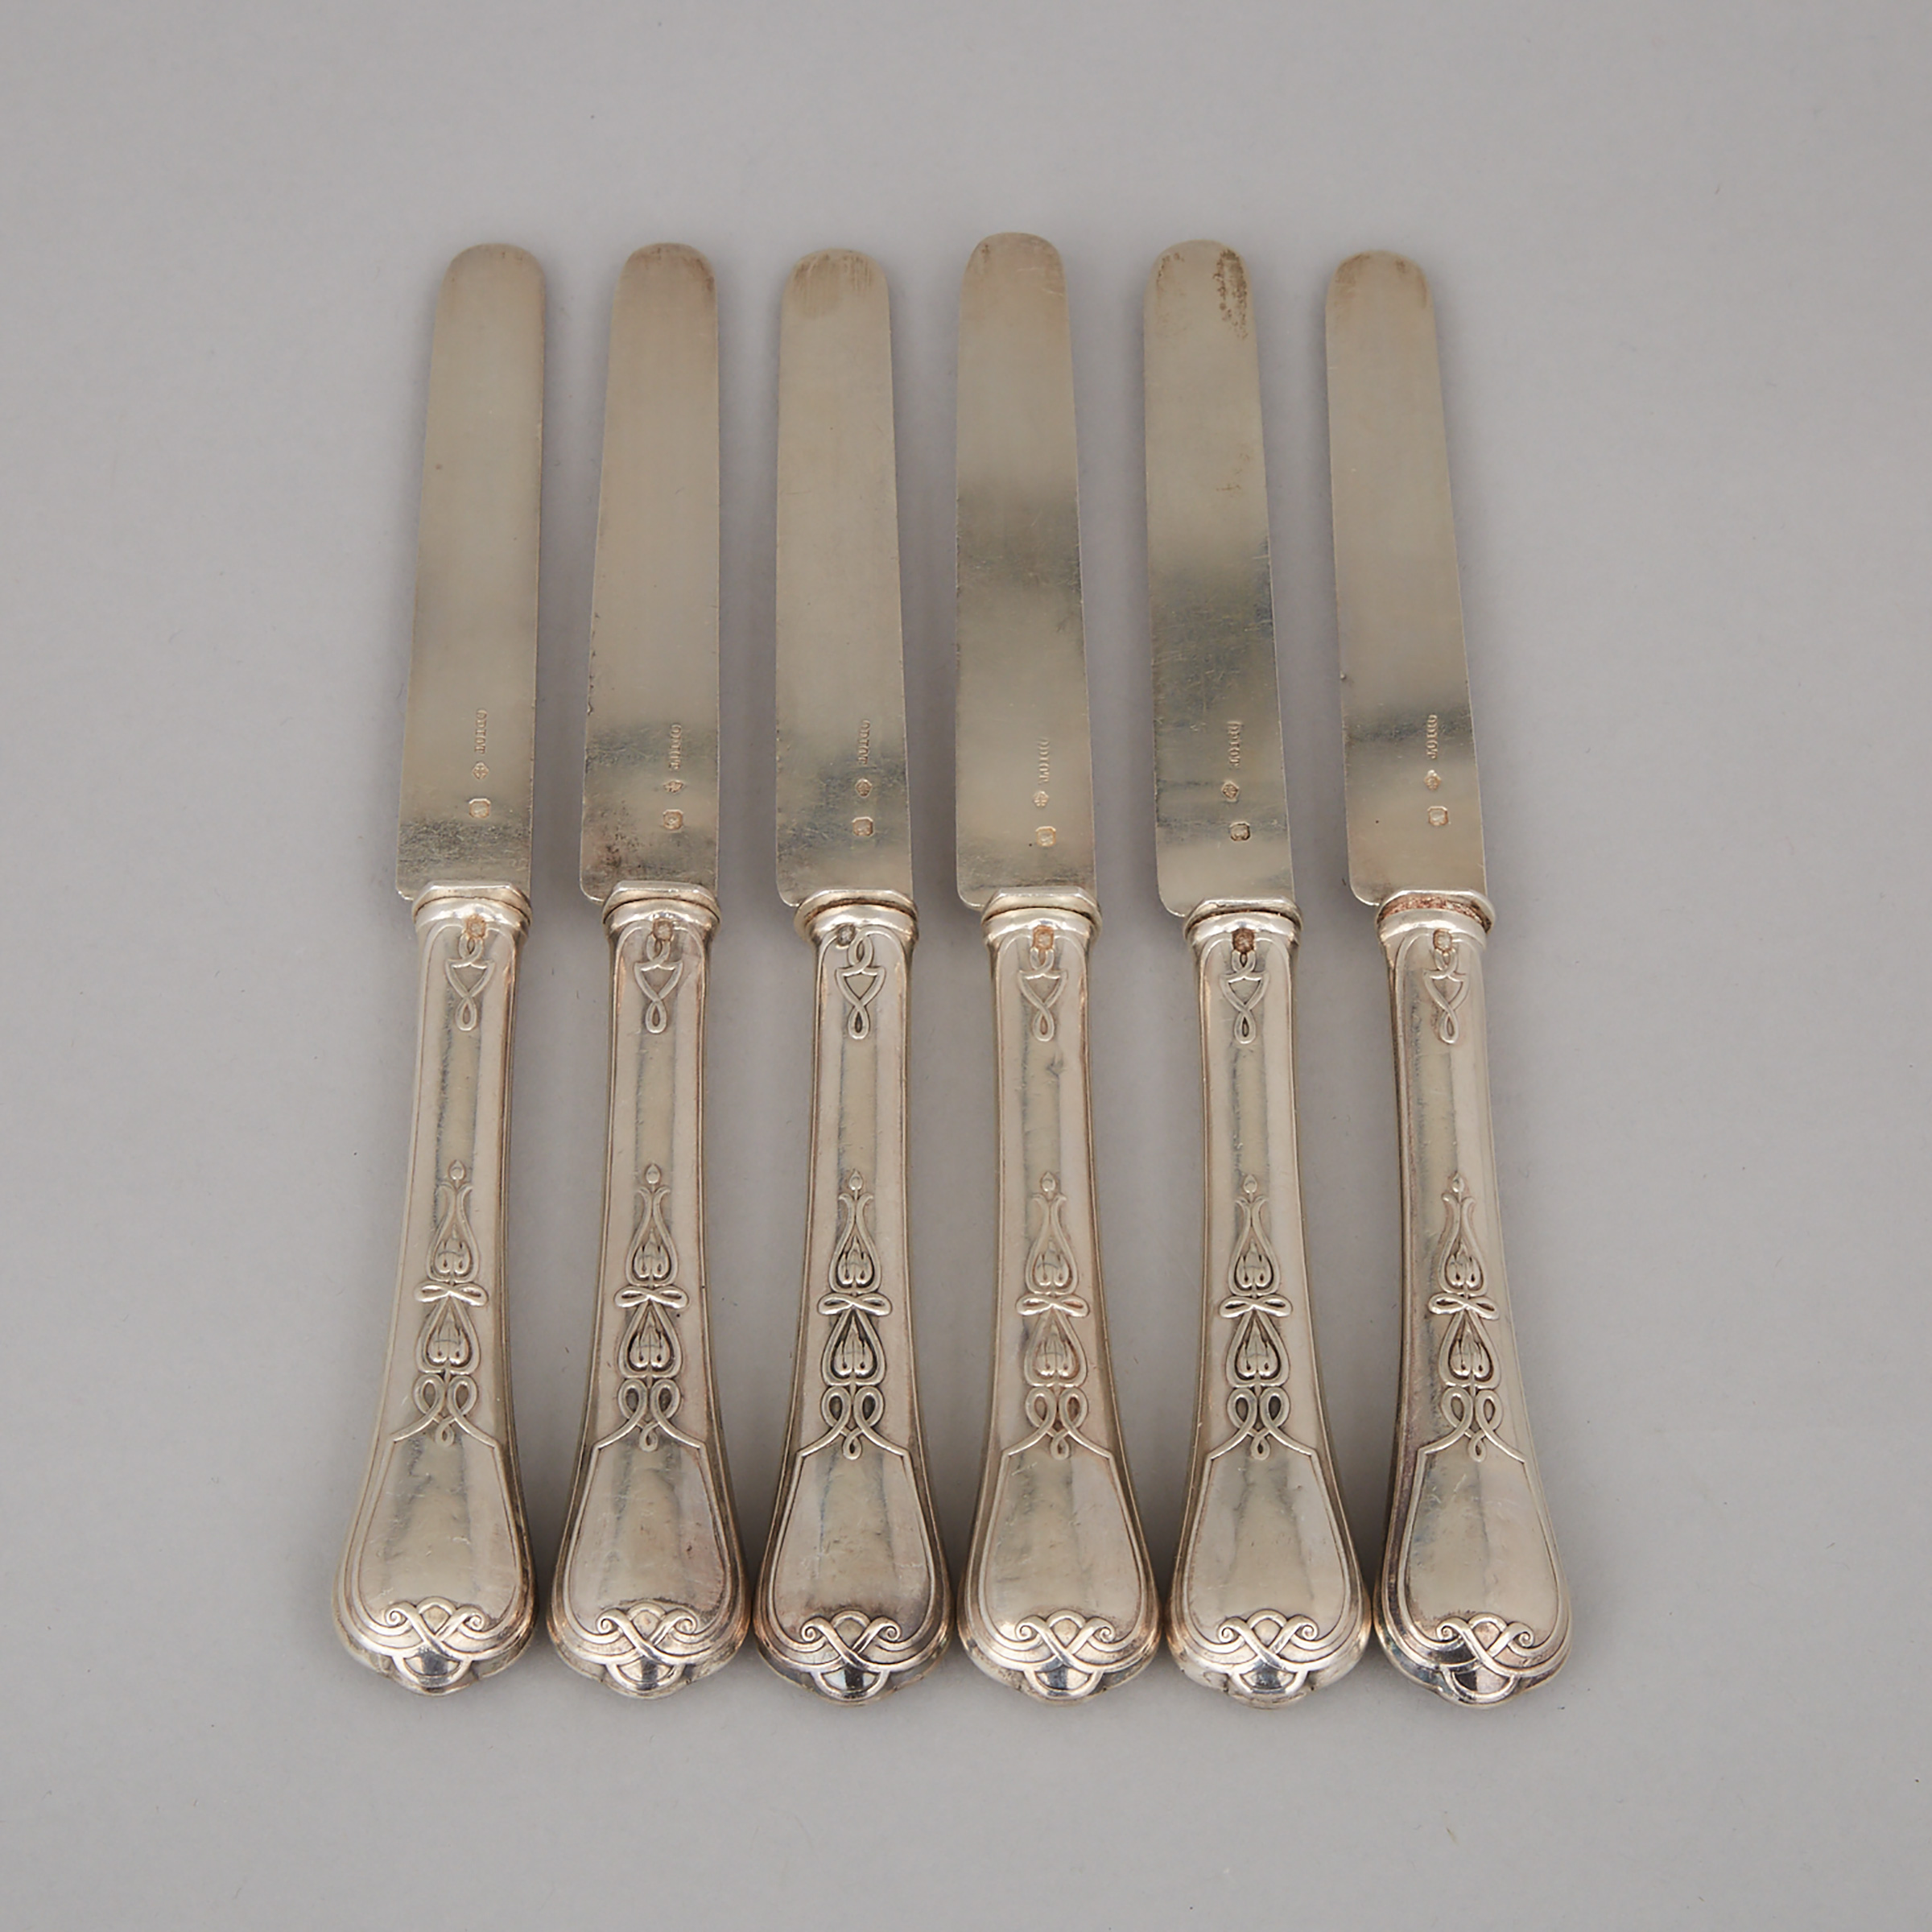 Six French Silver Dessert Knives, Odiot, Paris, late 19th century